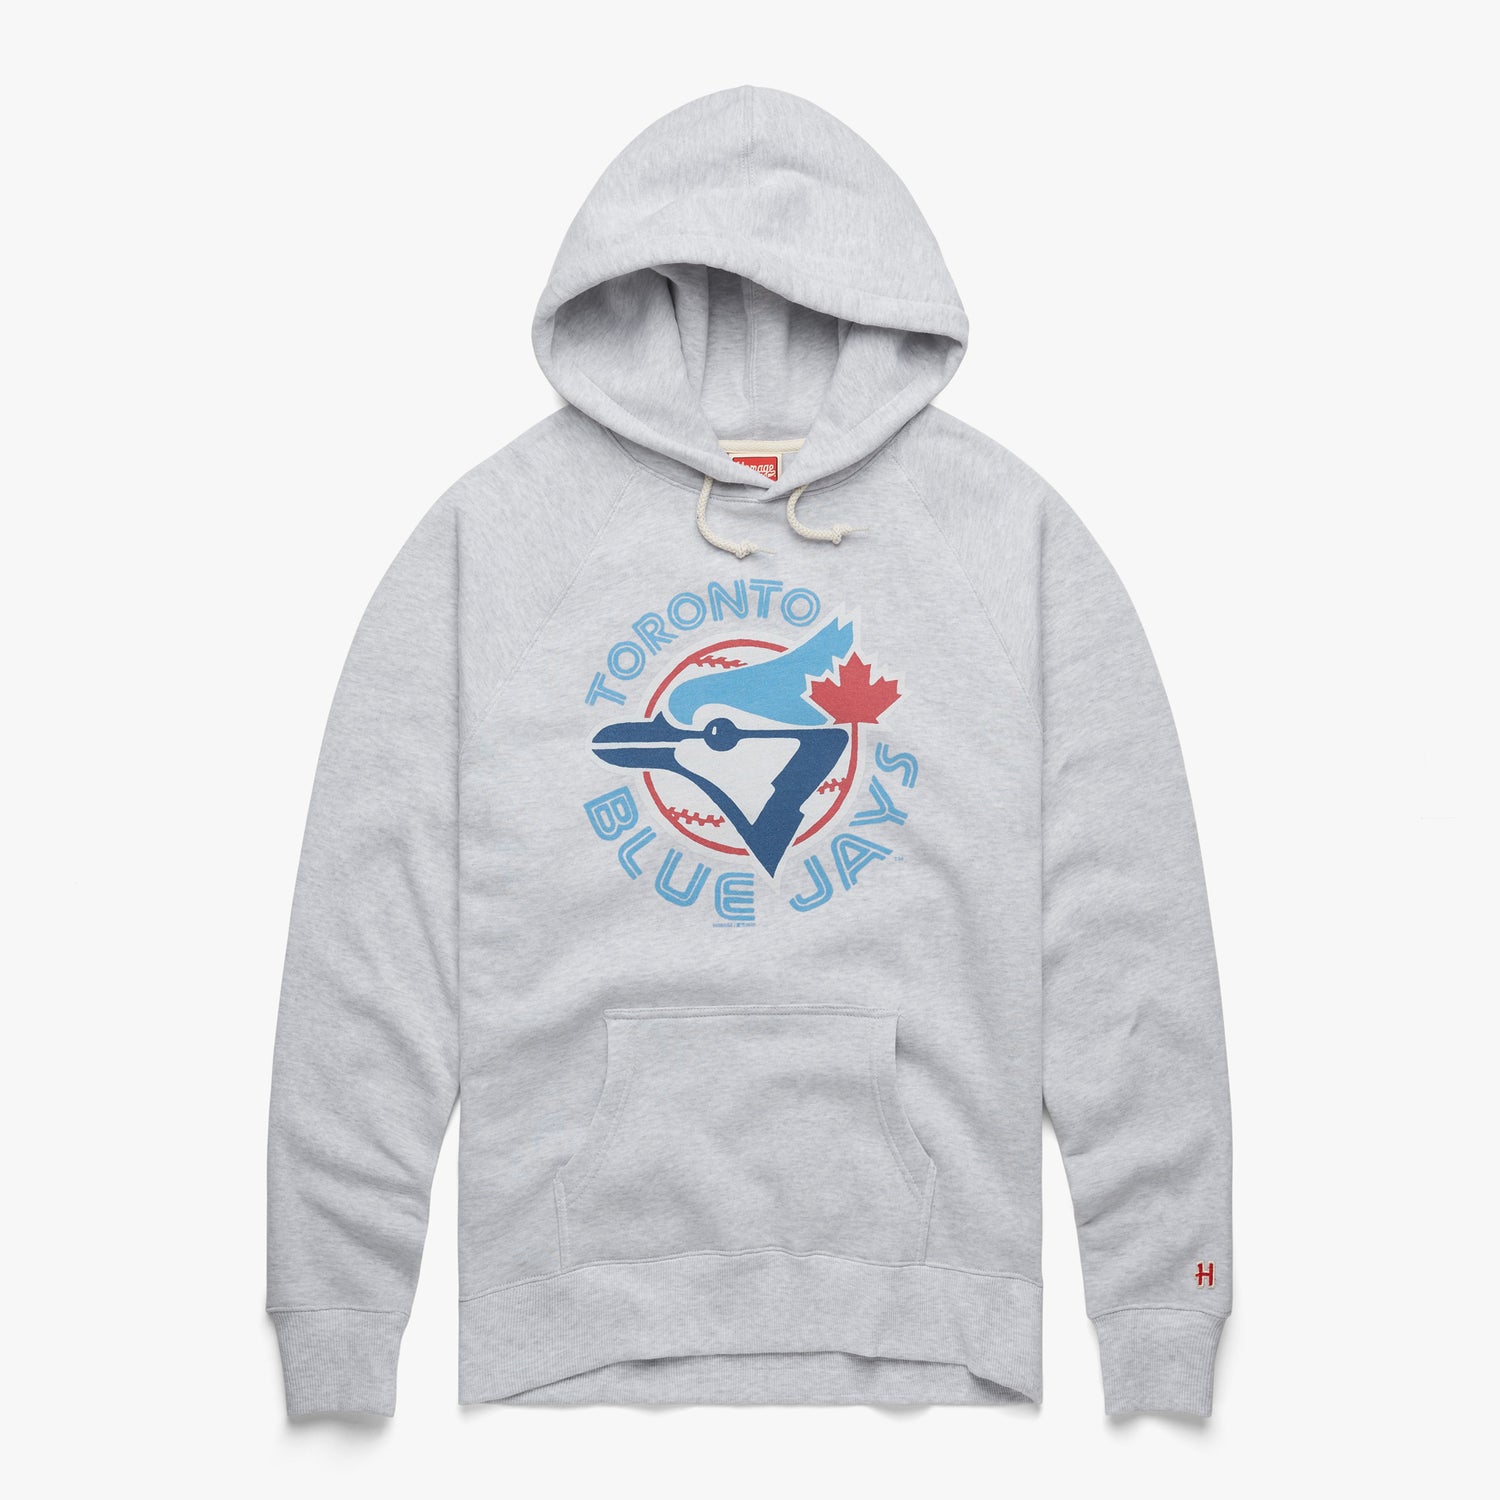 Toronto Blue Jays '77 Hoodie from Homage. | Ash | Vintage Apparel from Homage.